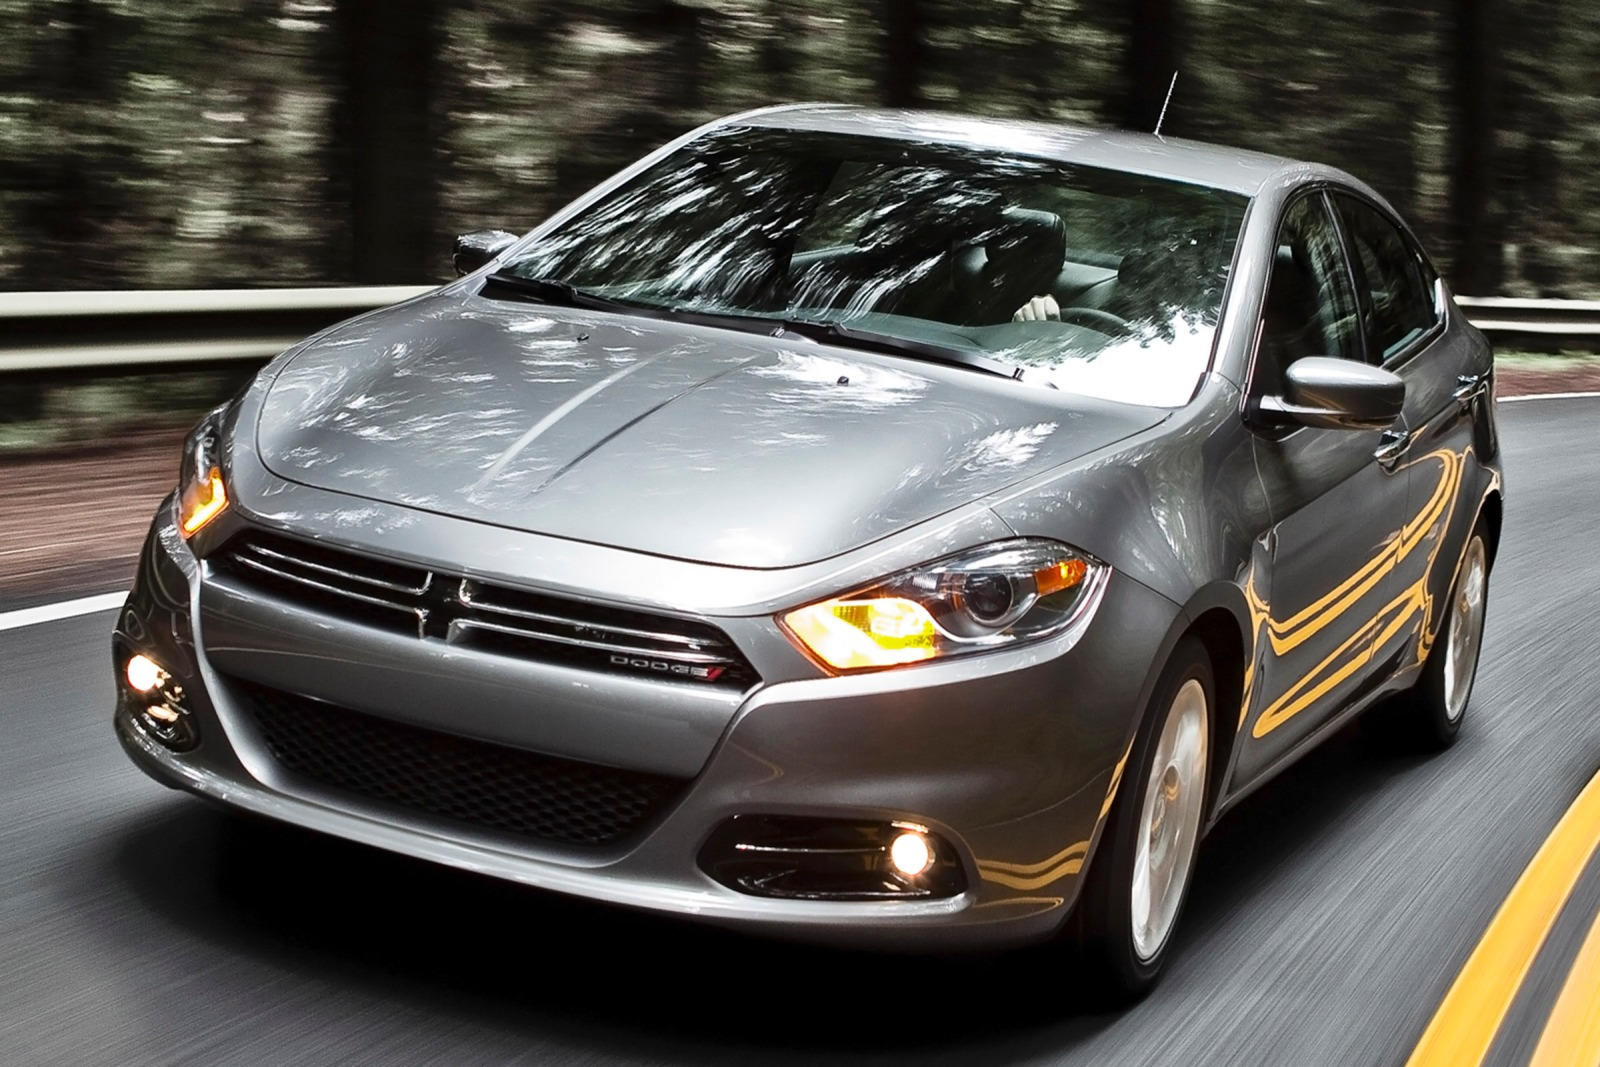 2013 Dodge Dart Front View Driving